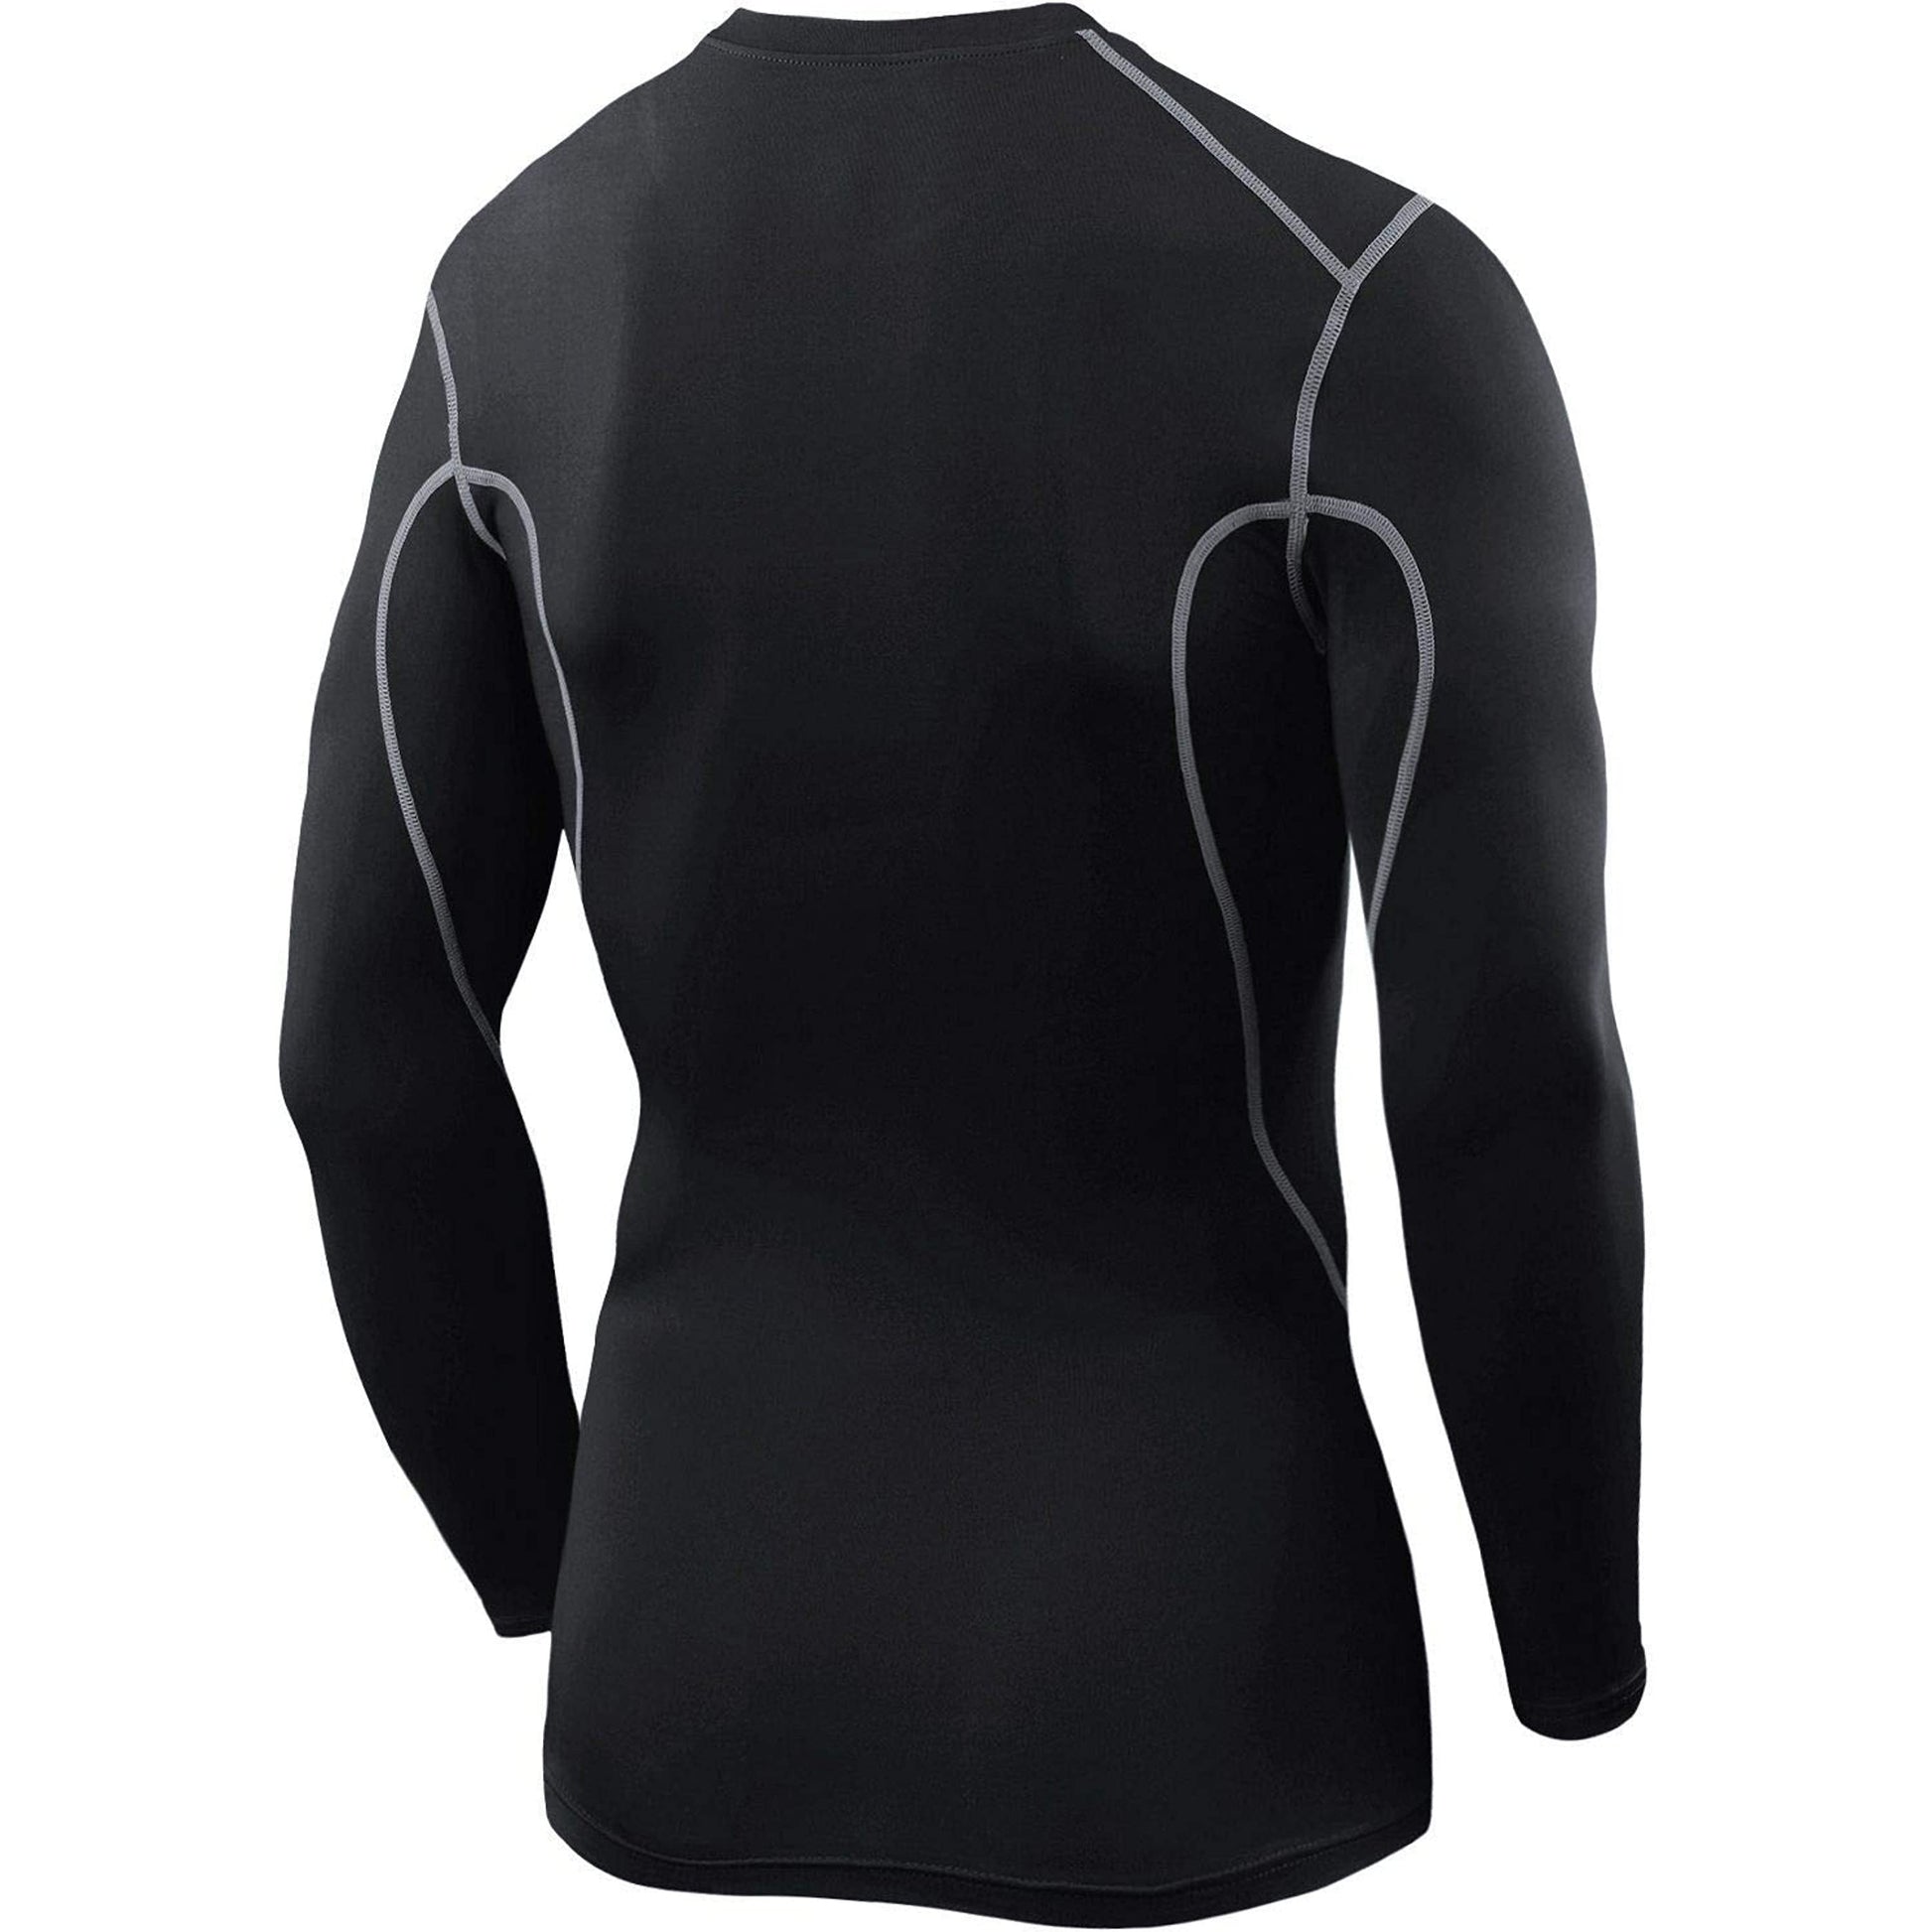 Tca Pro Performance Long Sleeve S Tcals Black Back View